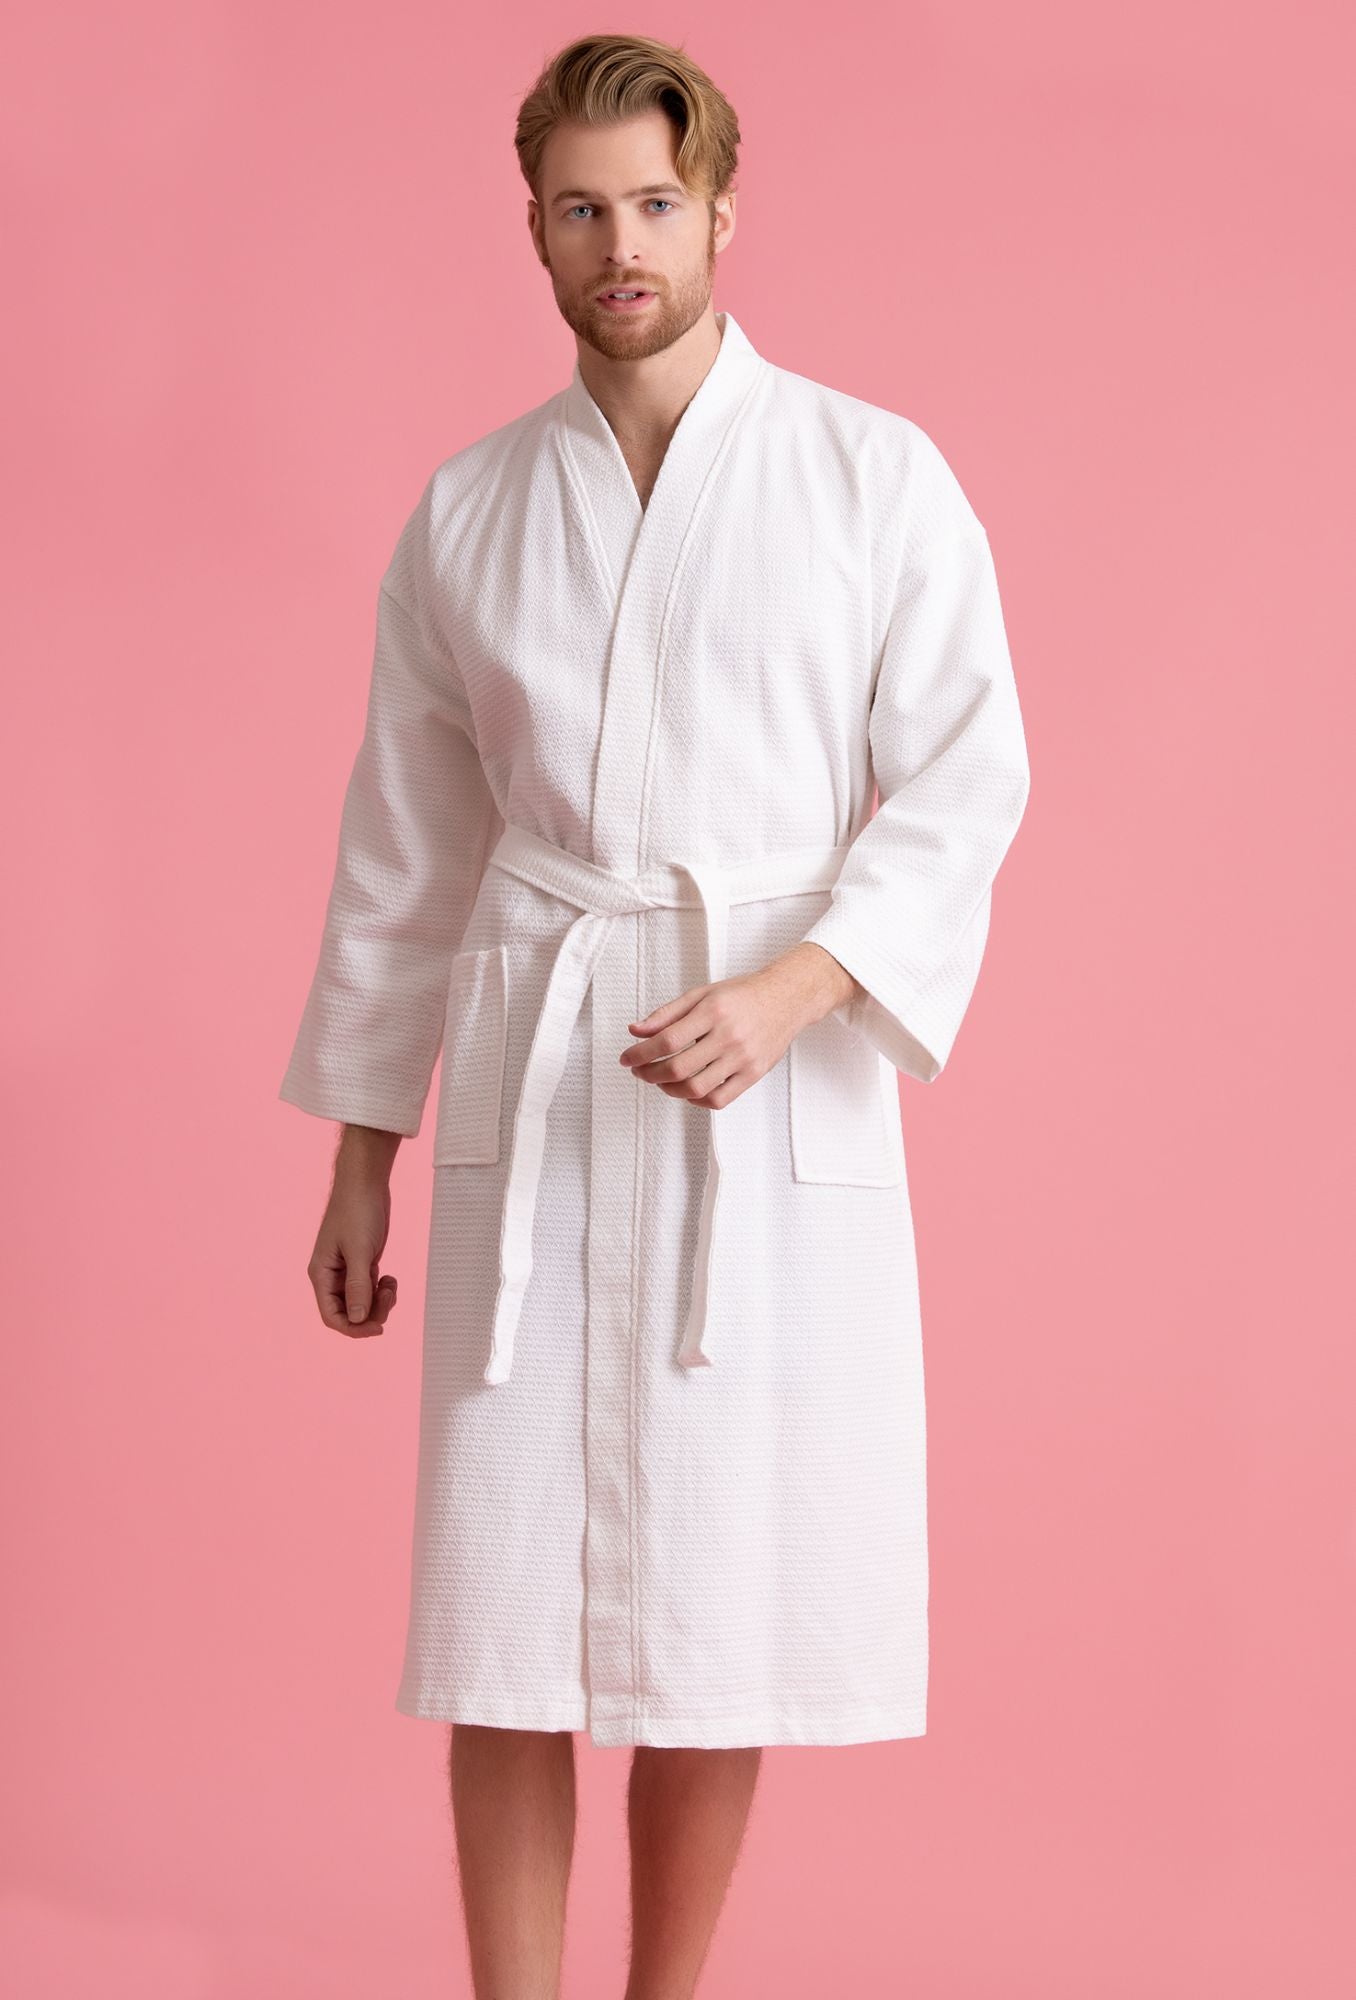 TowelSelections Mens Hooded Robe, Premium Cotton Terry Cloth Bathrobe, Soft  Bath Robes for Men XS-4X Small White at Amazon Men's Clothing store